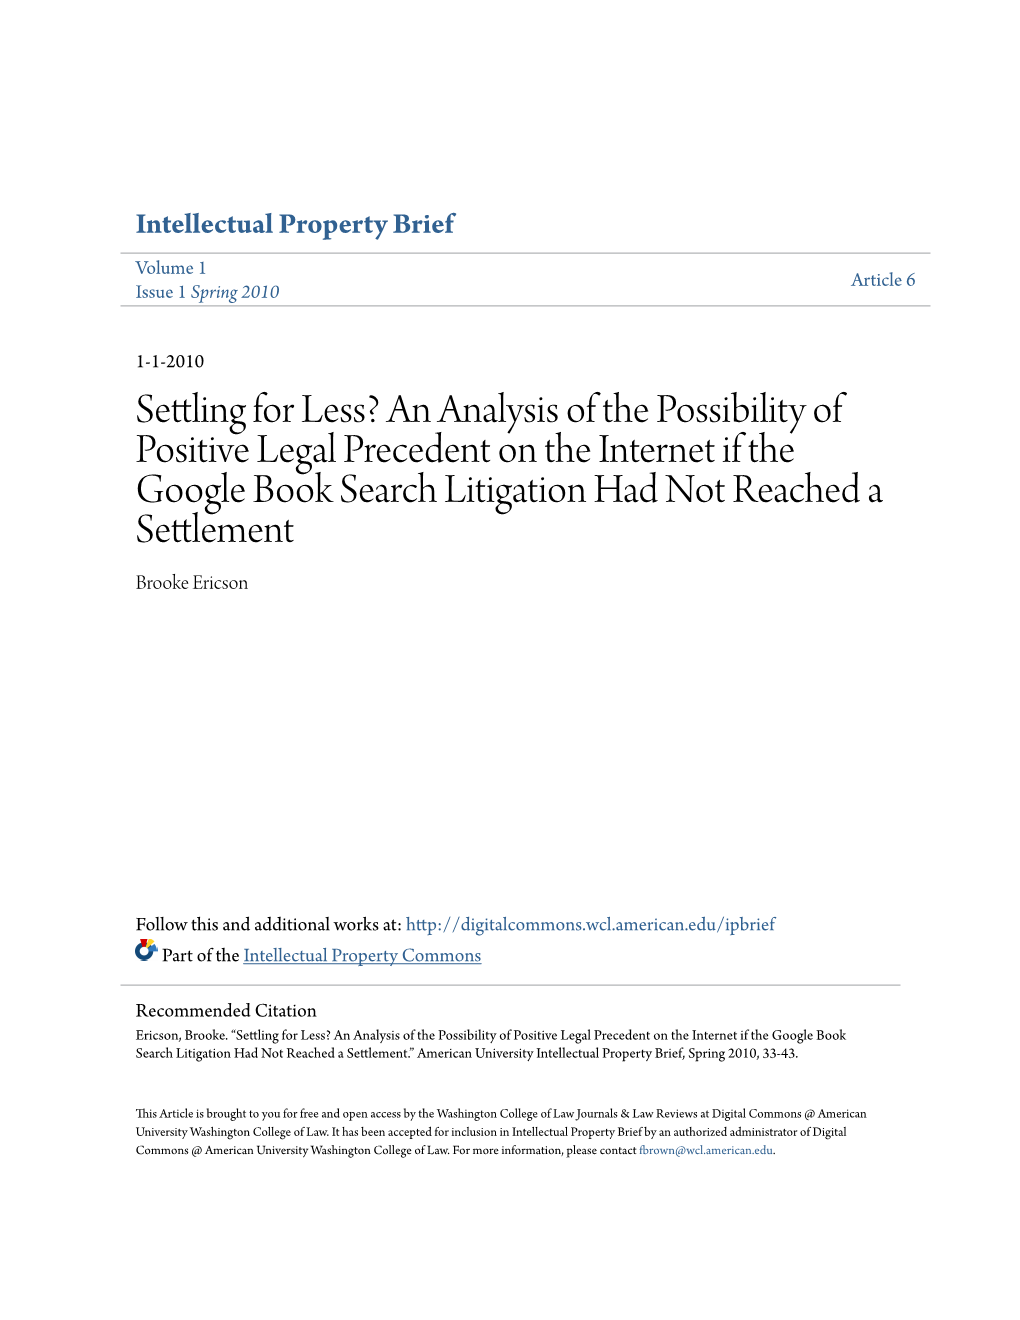 An Analysis of the Possibility of Positive Legal Precedent on the Internet If the Google Book Search Litigation Had Not Reached a Settlement Brooke Ericson